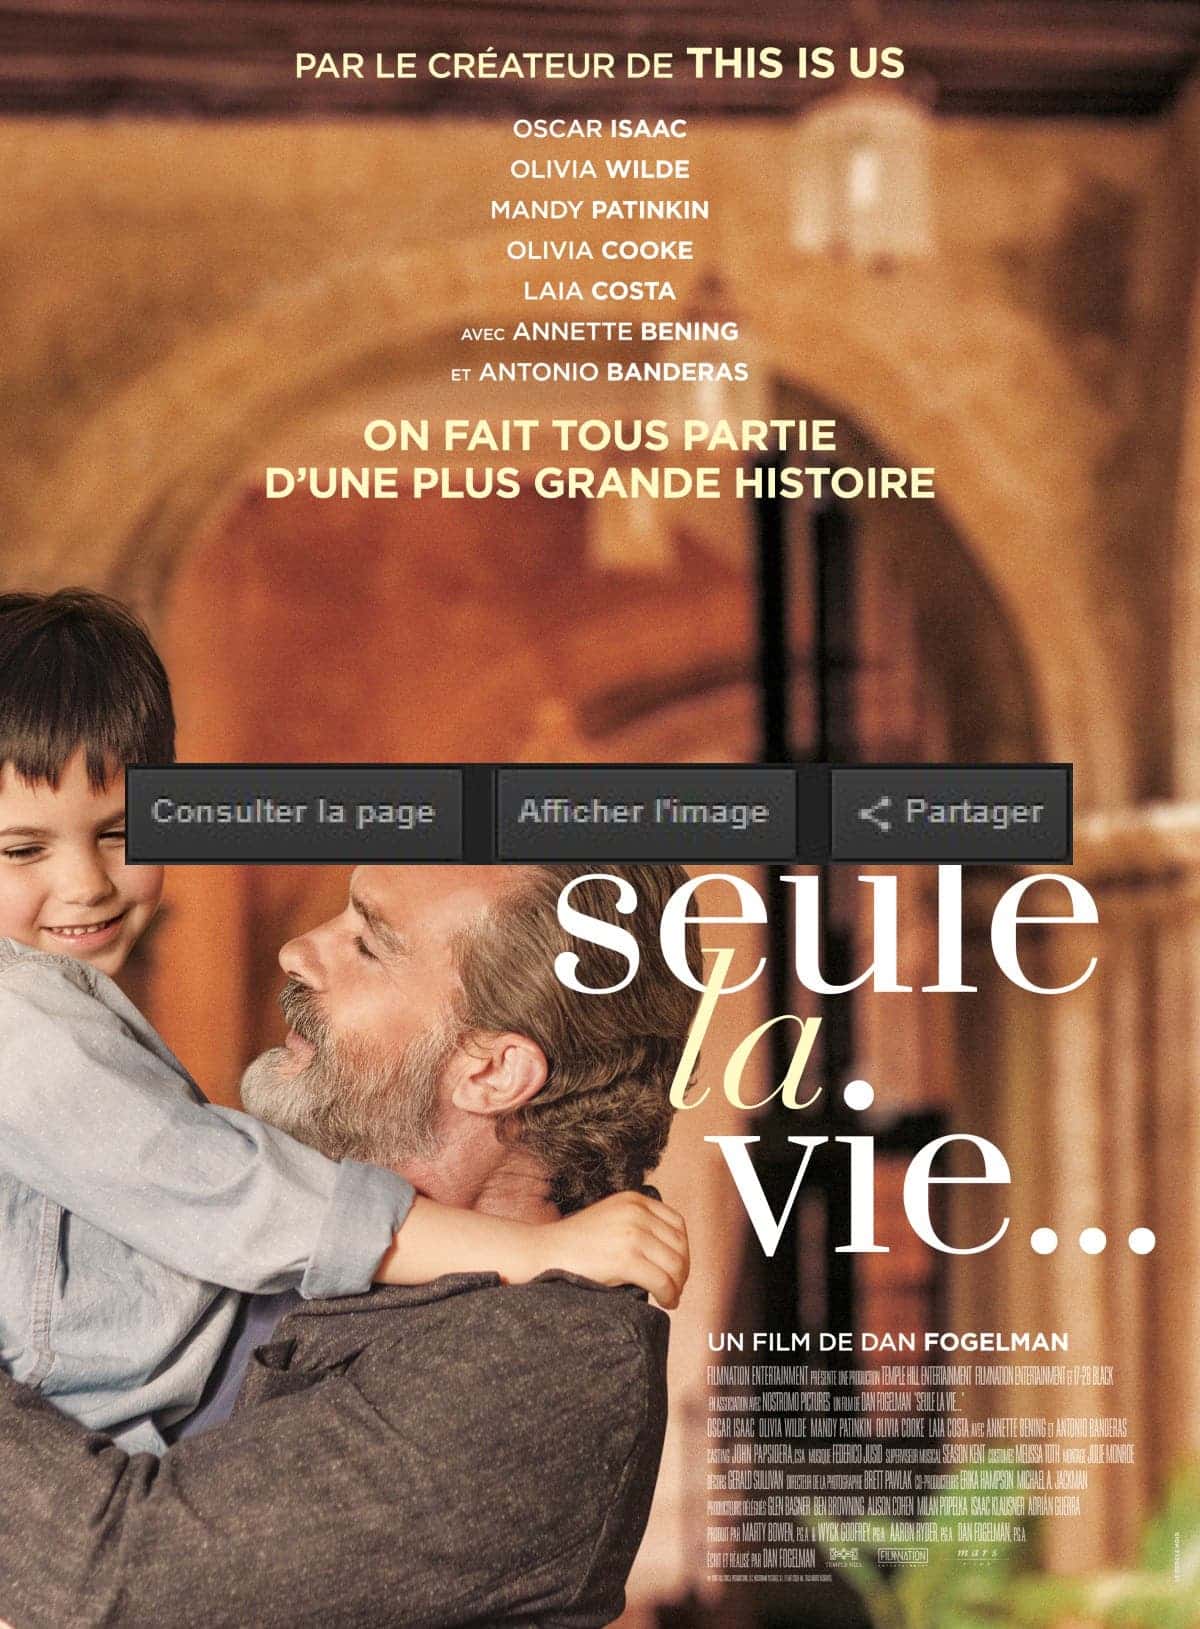 Seule la vie (Streaming, Synopsis, Casting, Bande annonce)